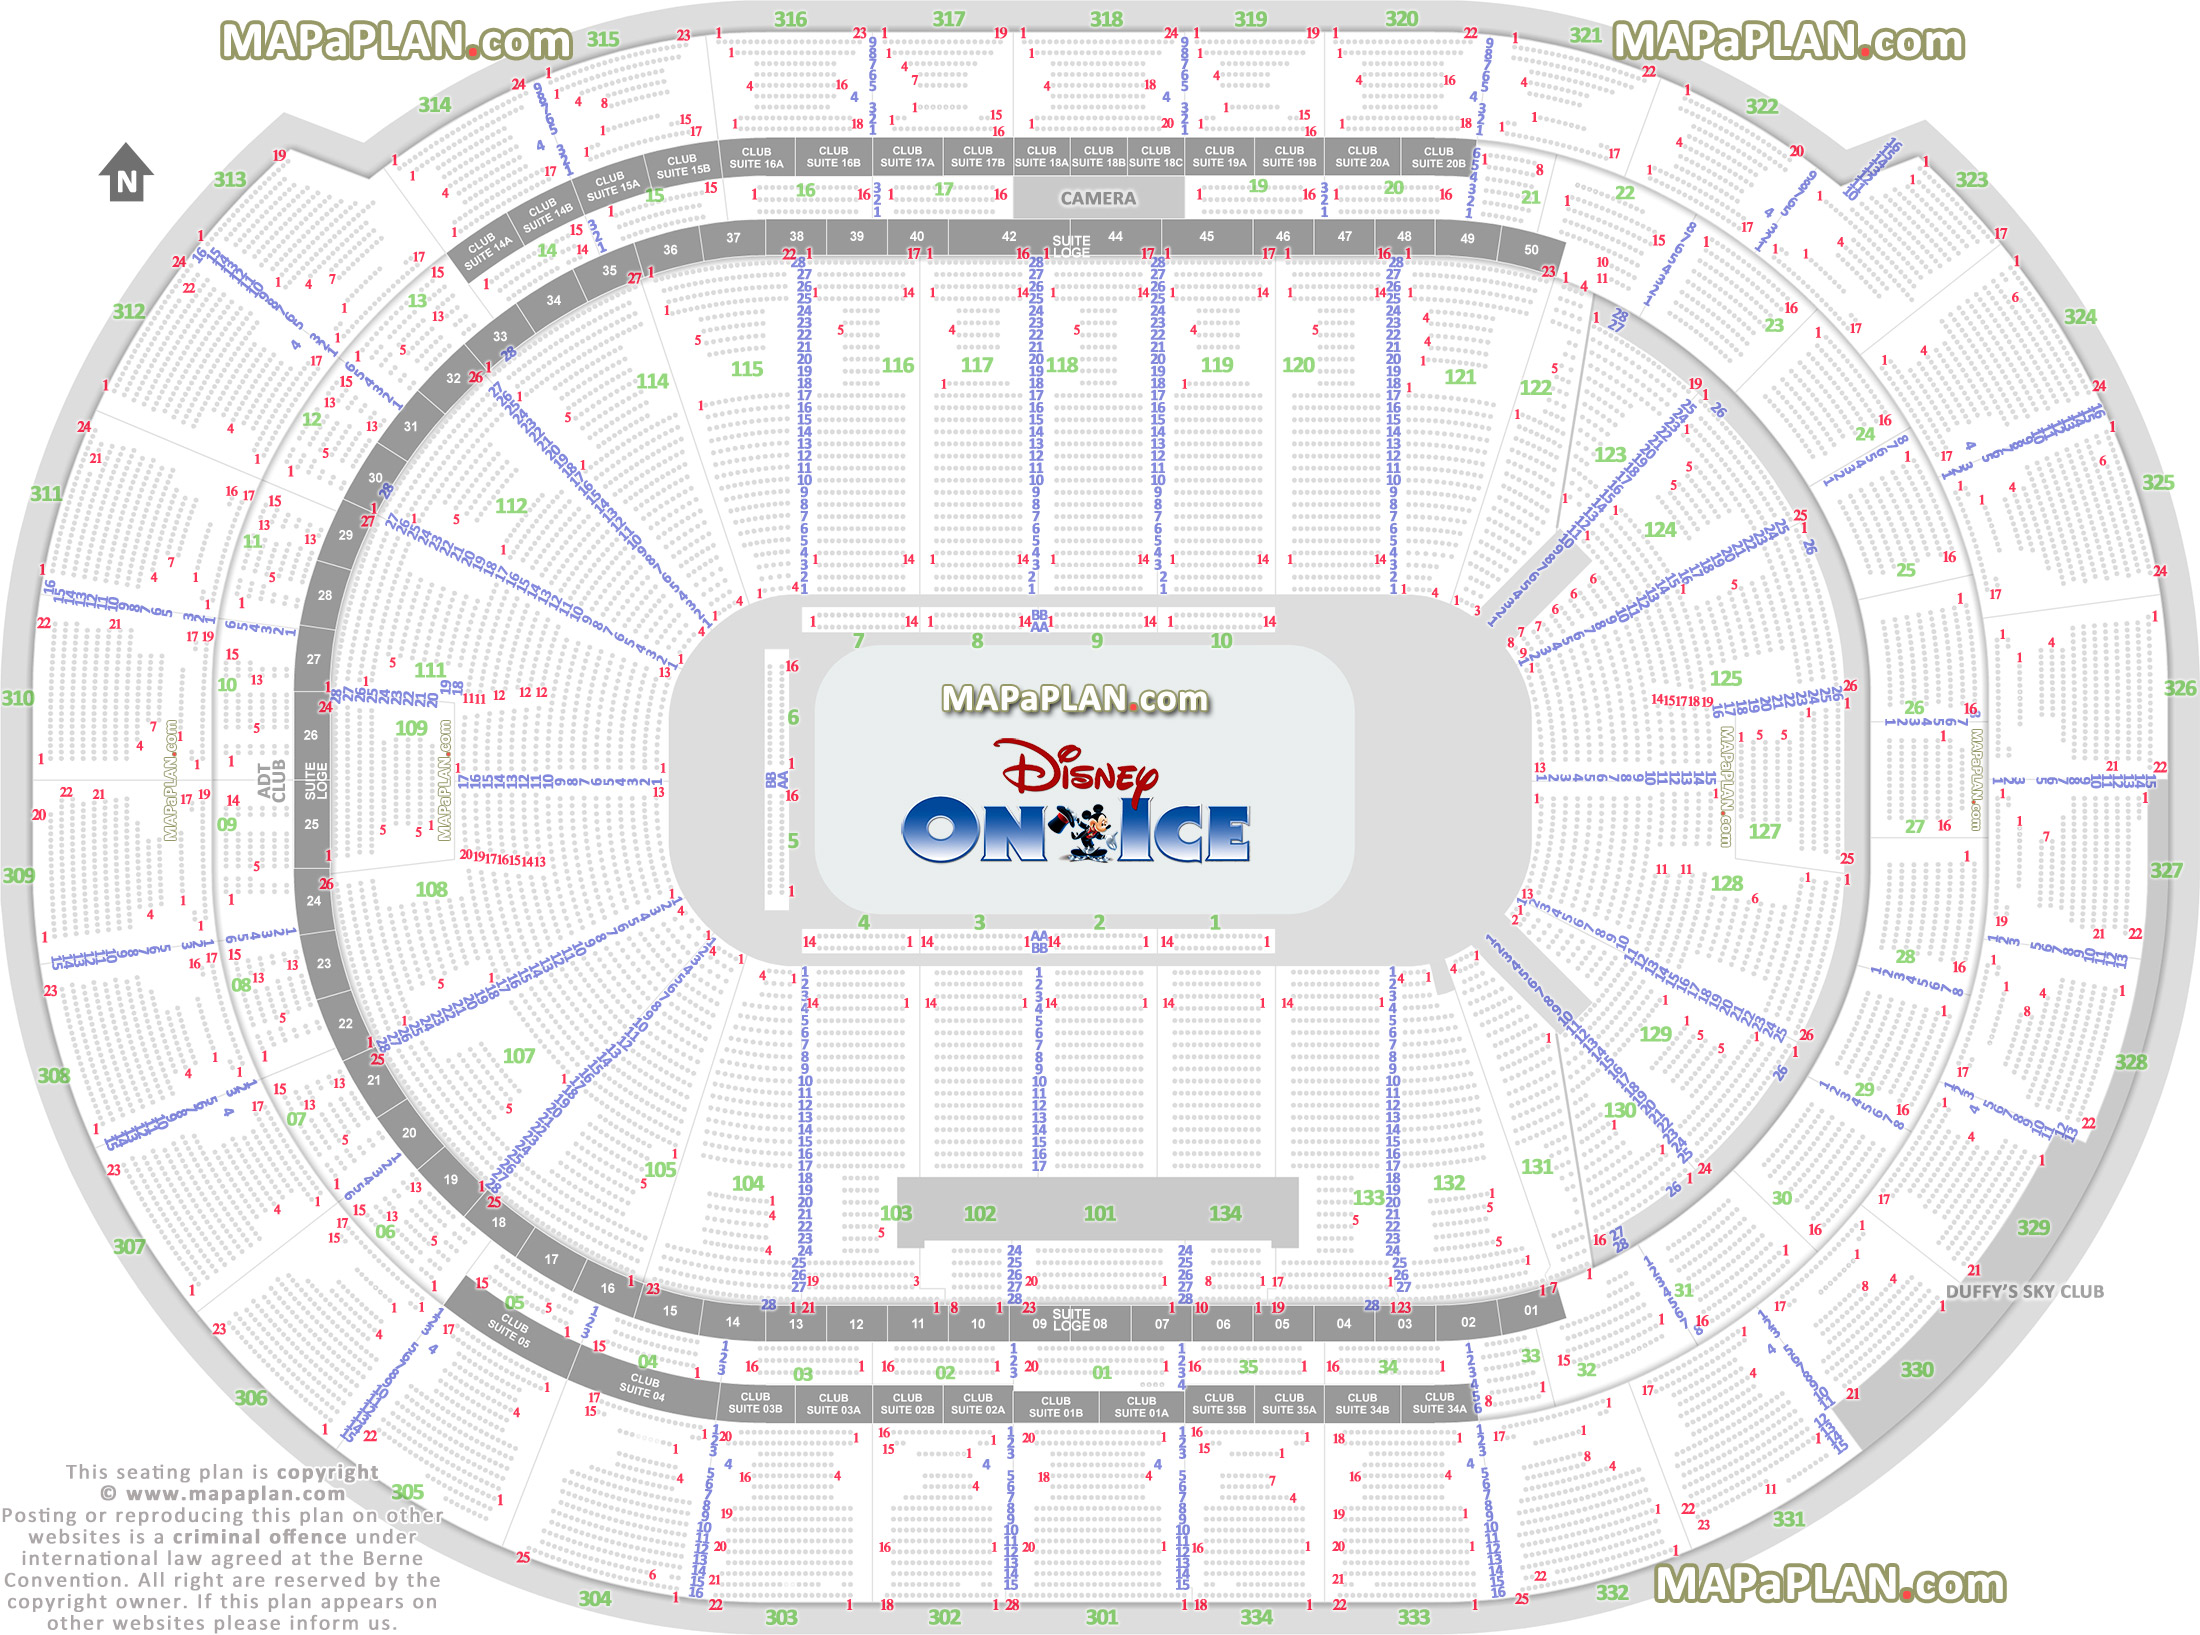 disney ice show seating arrangement review diagram best partial obstructed view finder precise aisle numbering location data Sunrise FLA Live Arena seating chart